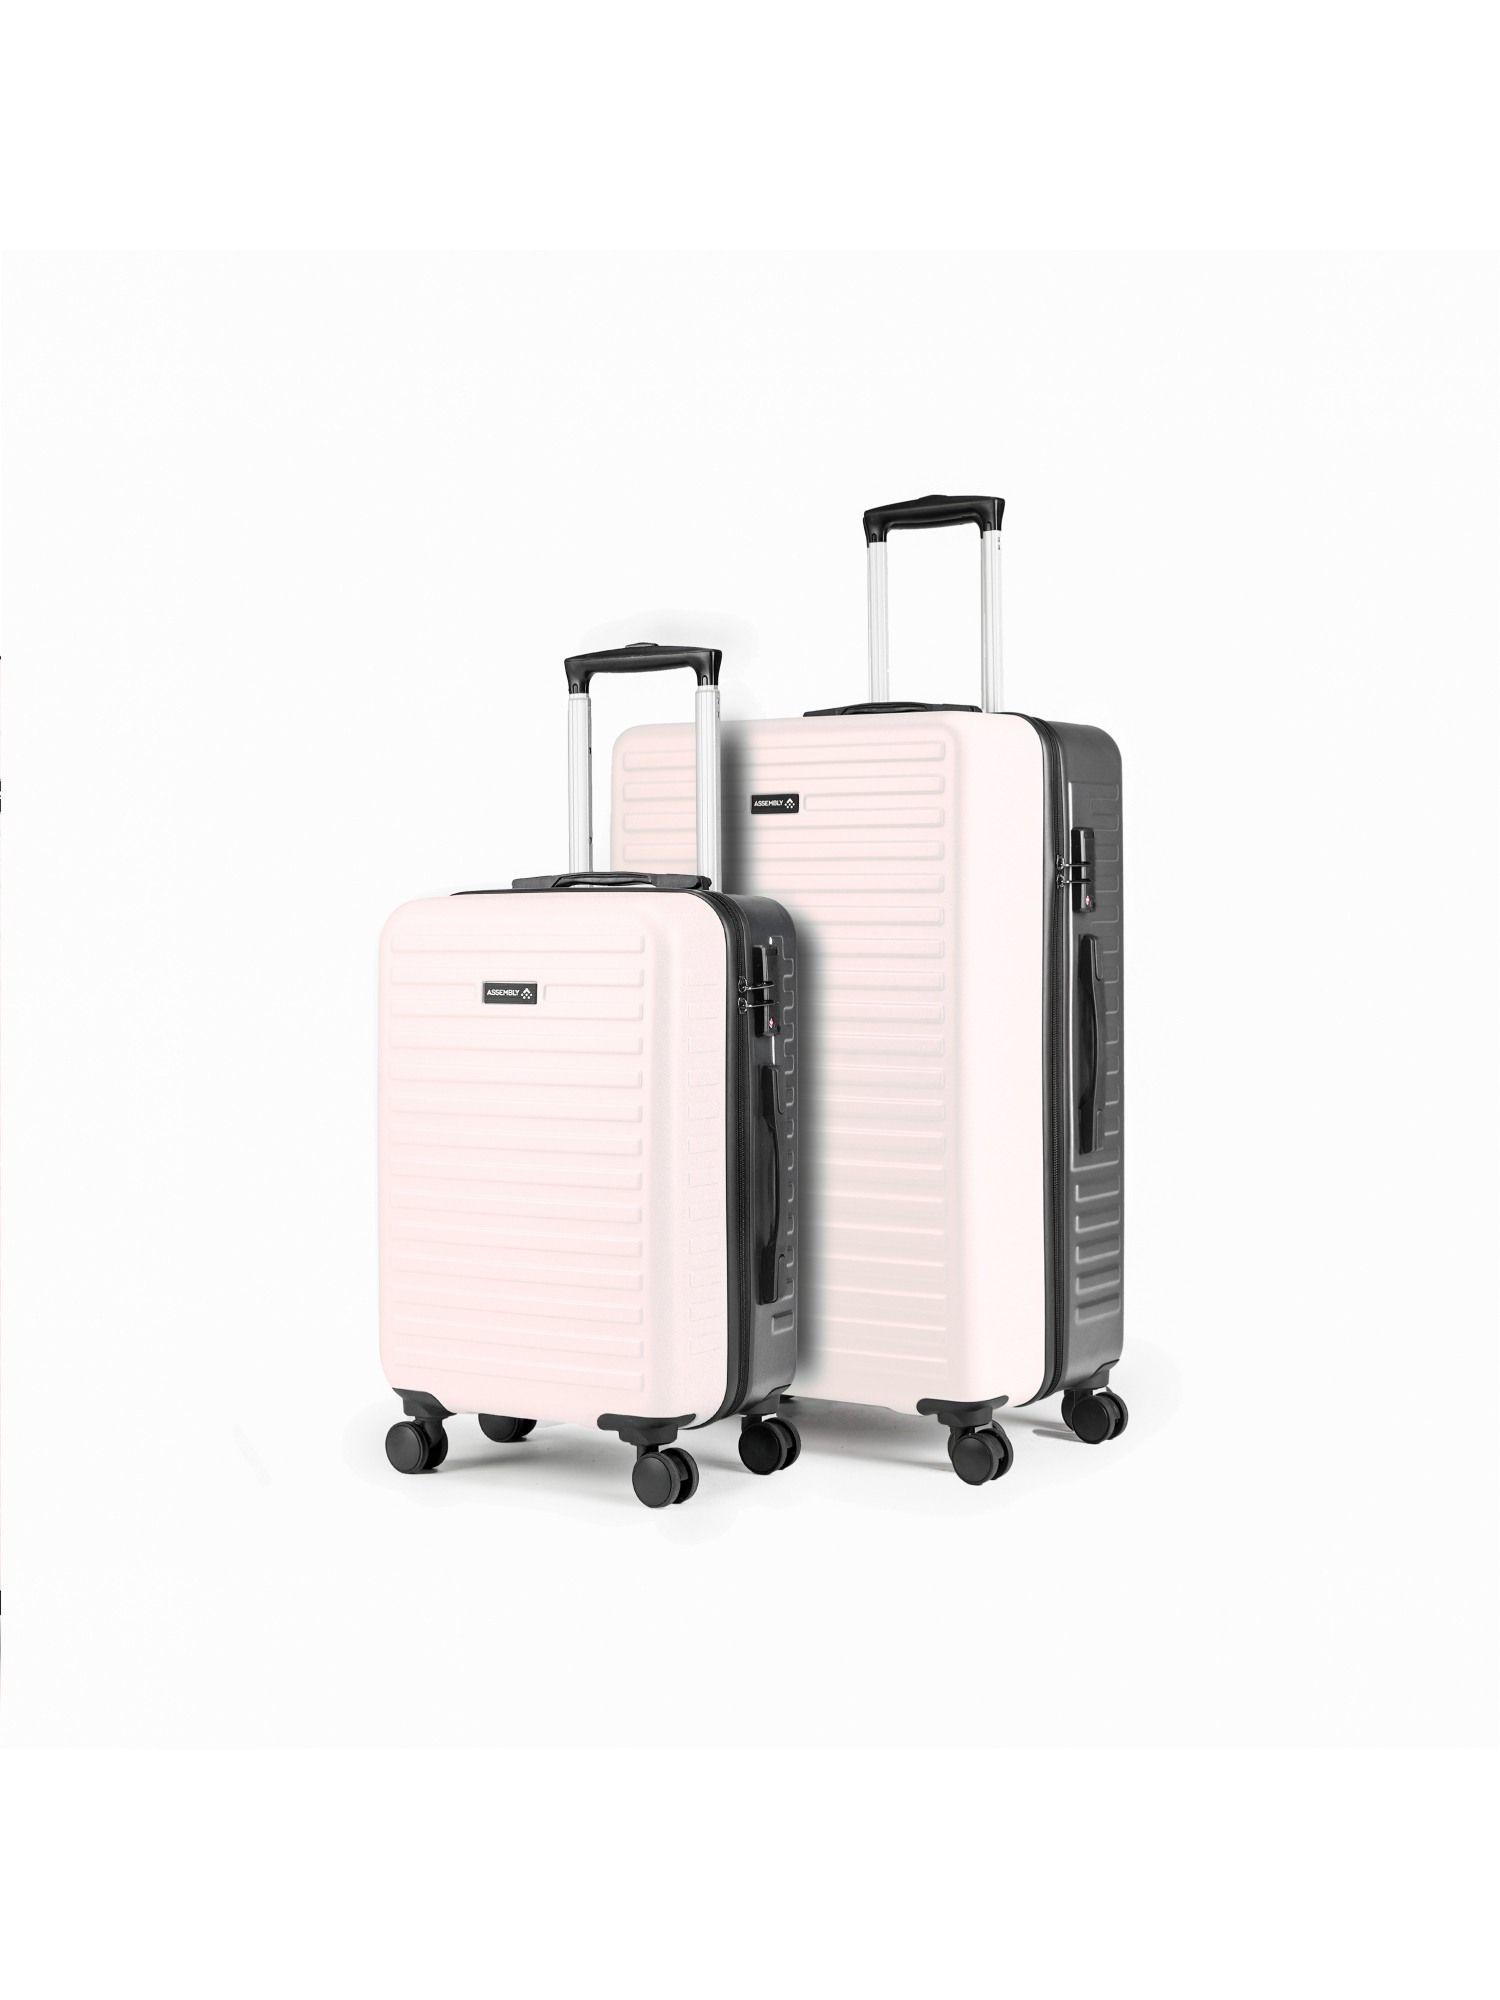 large-check---in-luggage-&-cabin-trolley-set-of-2---ivory-&-grey